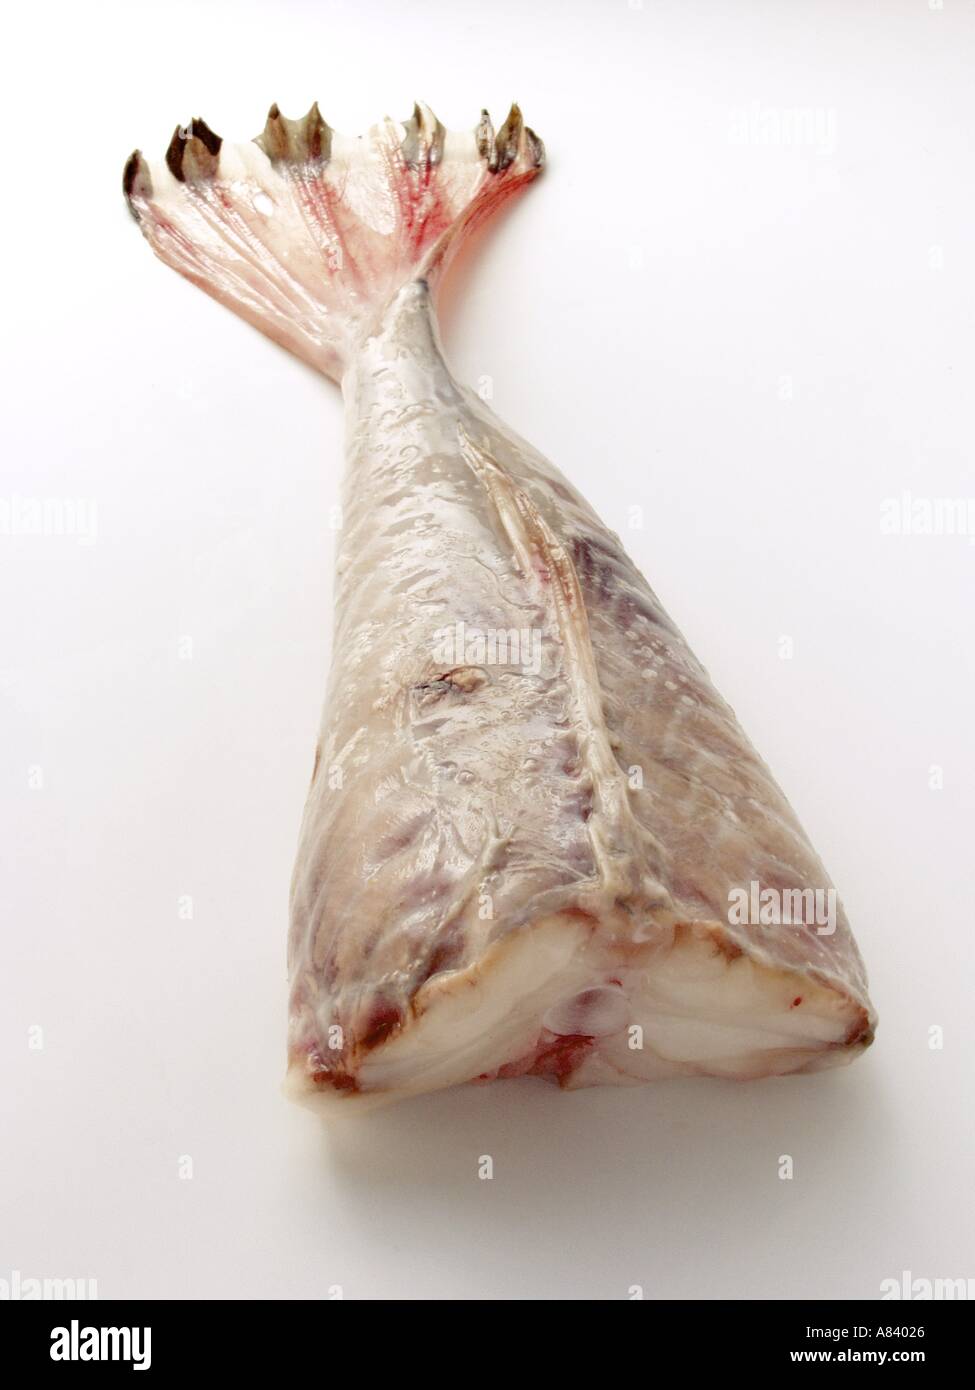 Monkfish with Head Removed Stock Photo